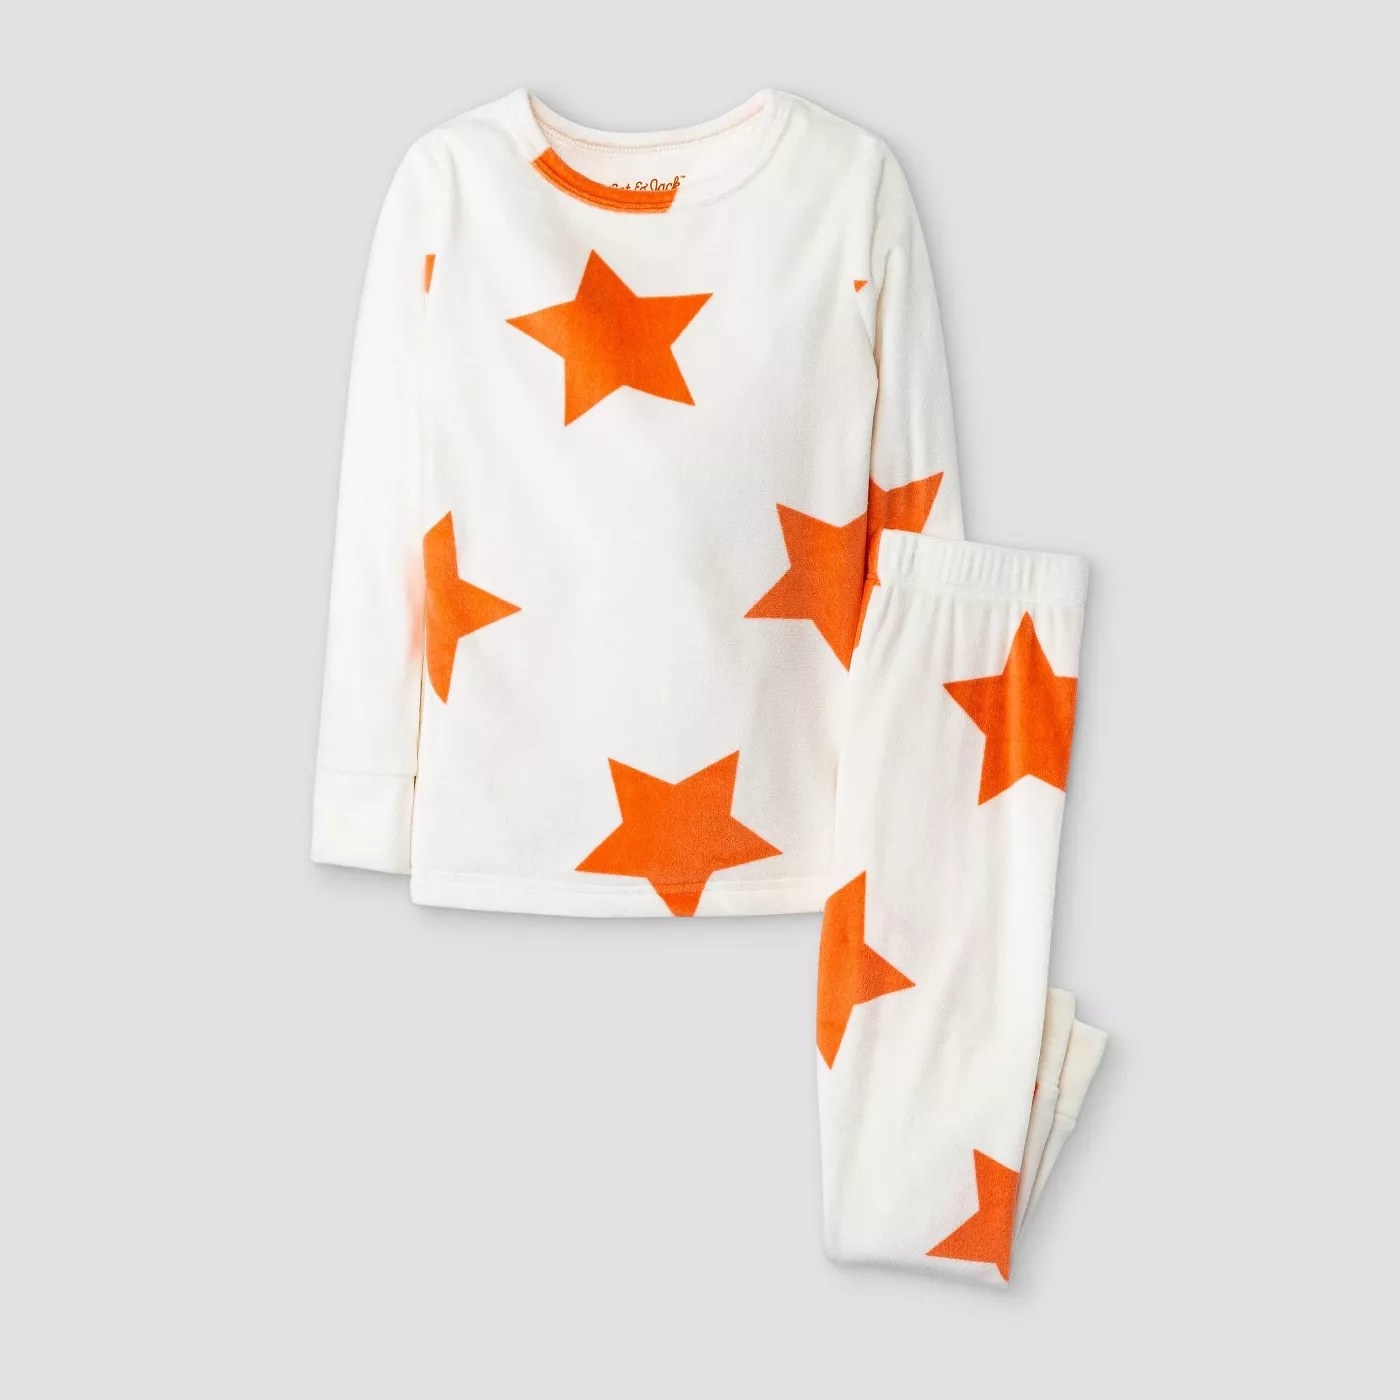 The white long-sleeve shirt and pants with orange stars